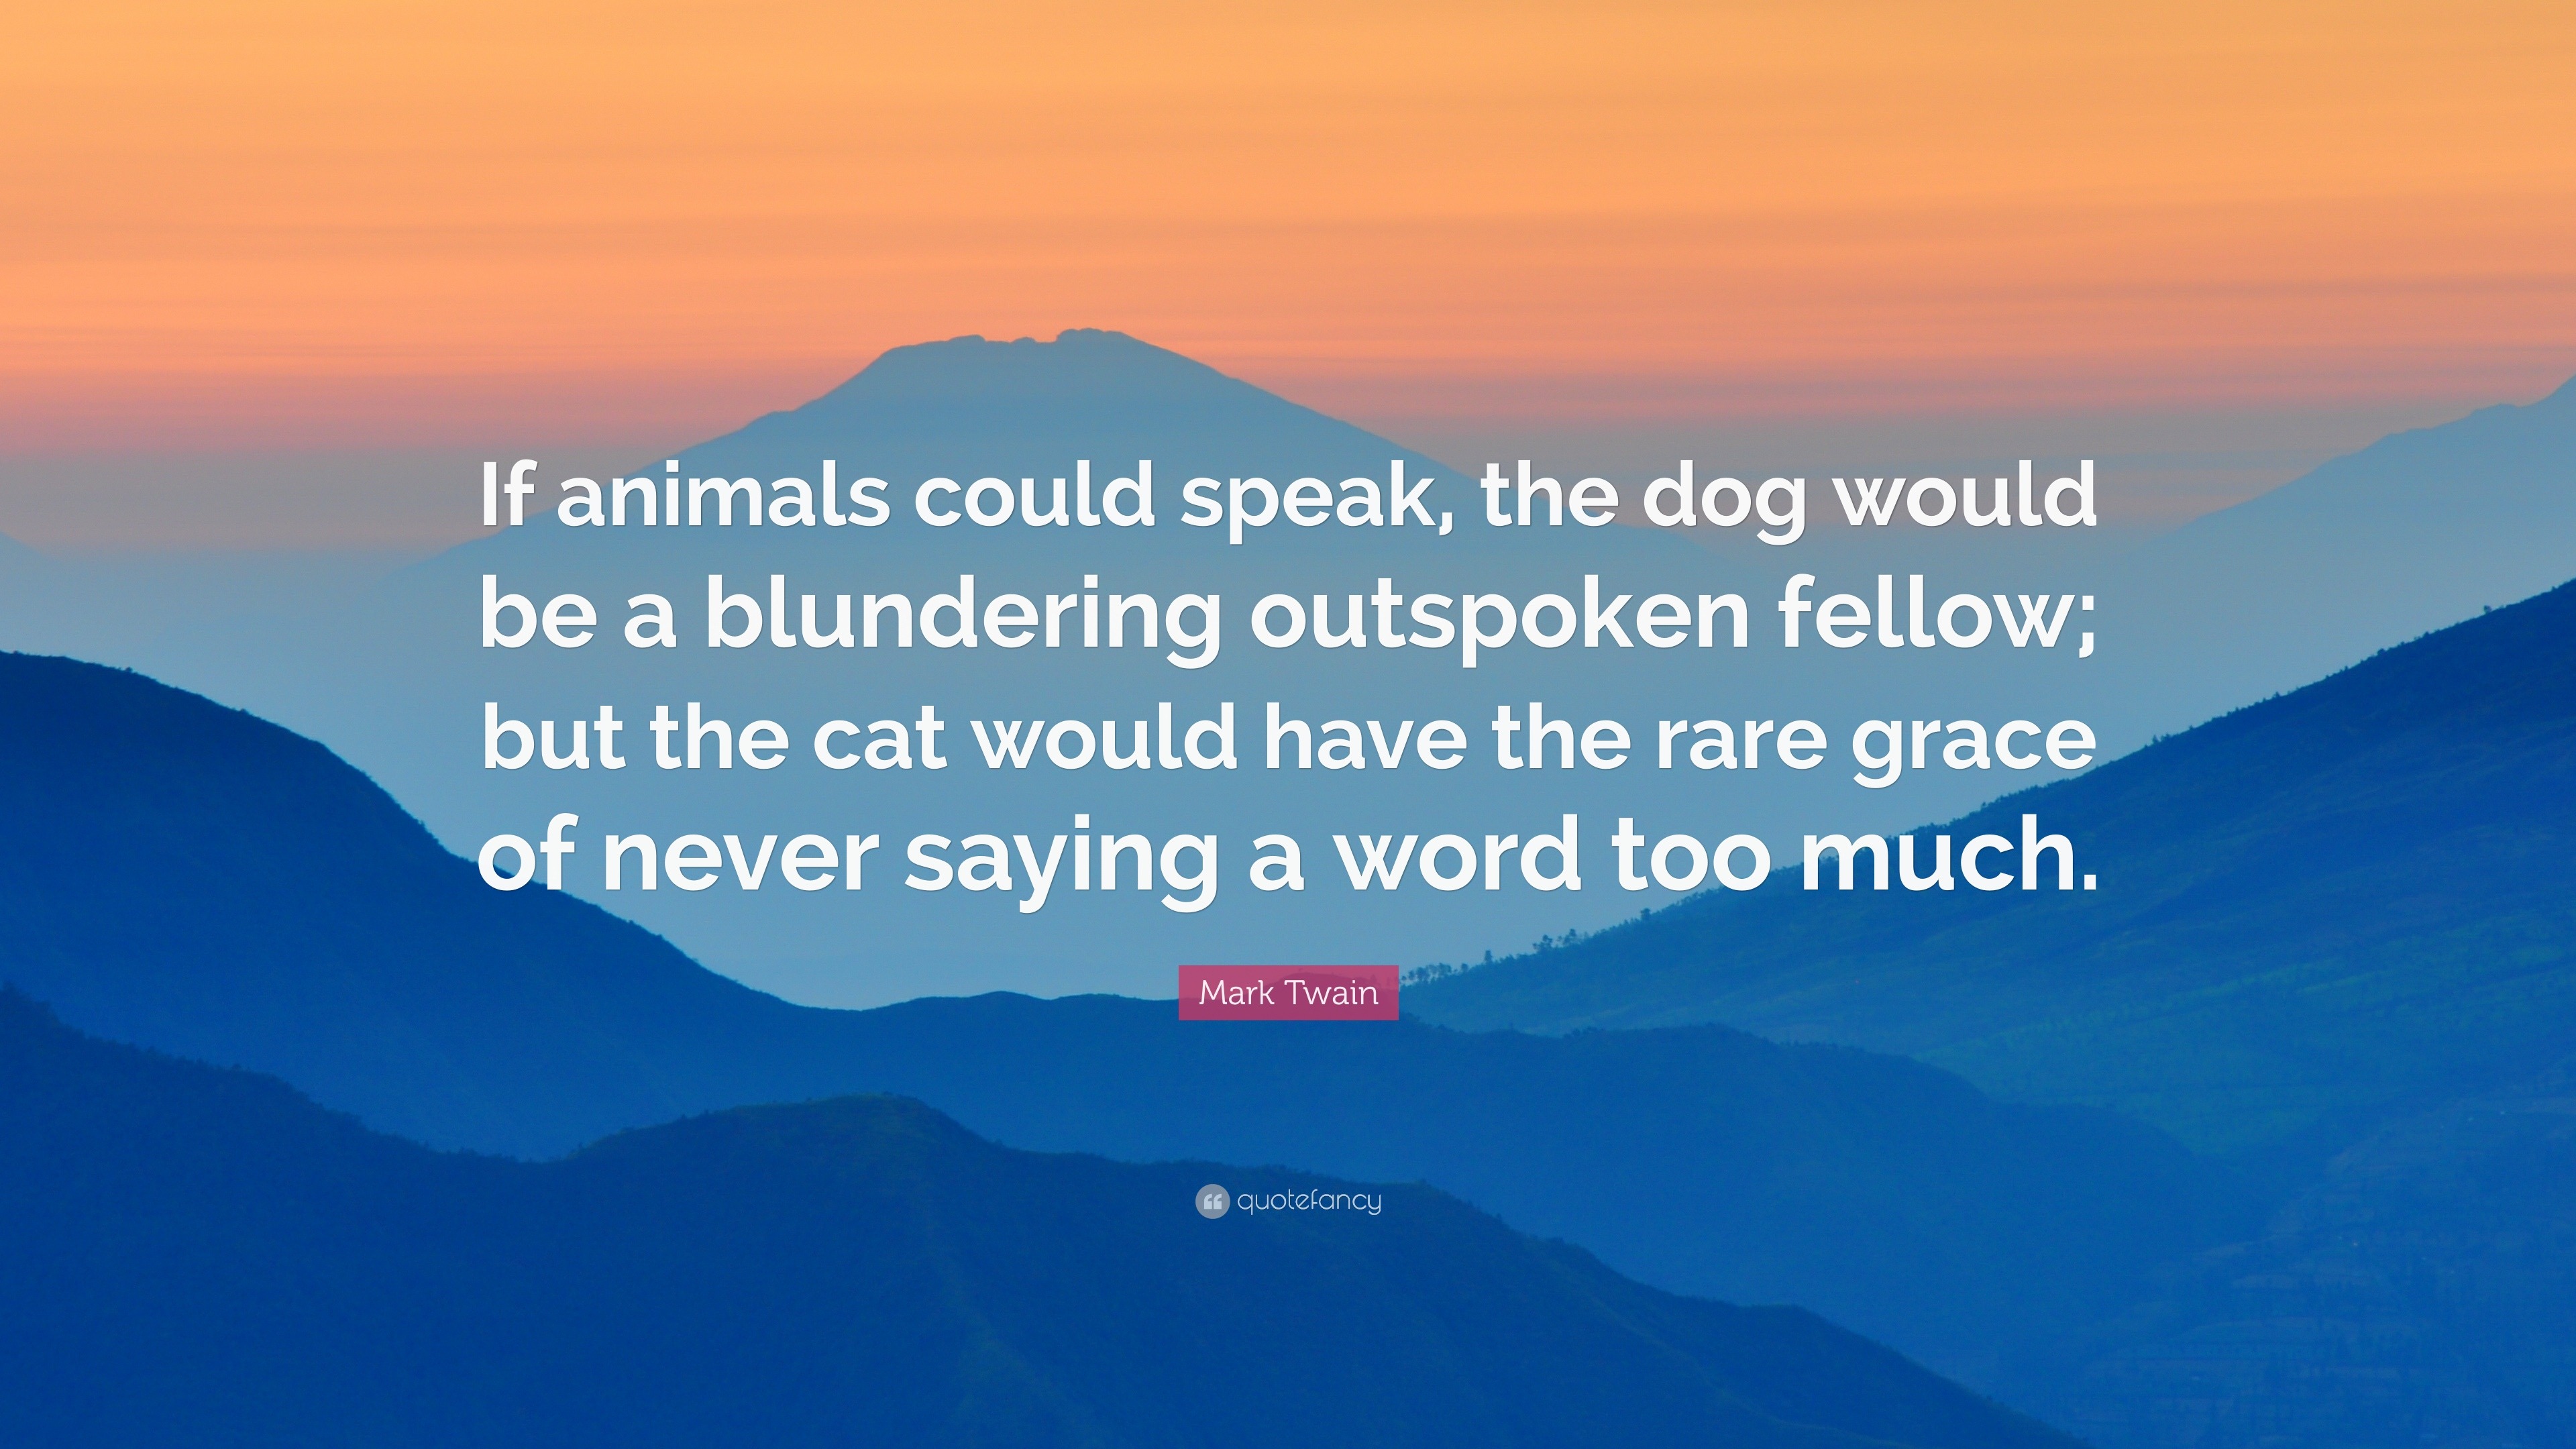 Mark Twain - If animals could speak, the dog would be a blundering  outspoken fellow; but the cat would have the rare grace of never saying a  word too much. Poster for